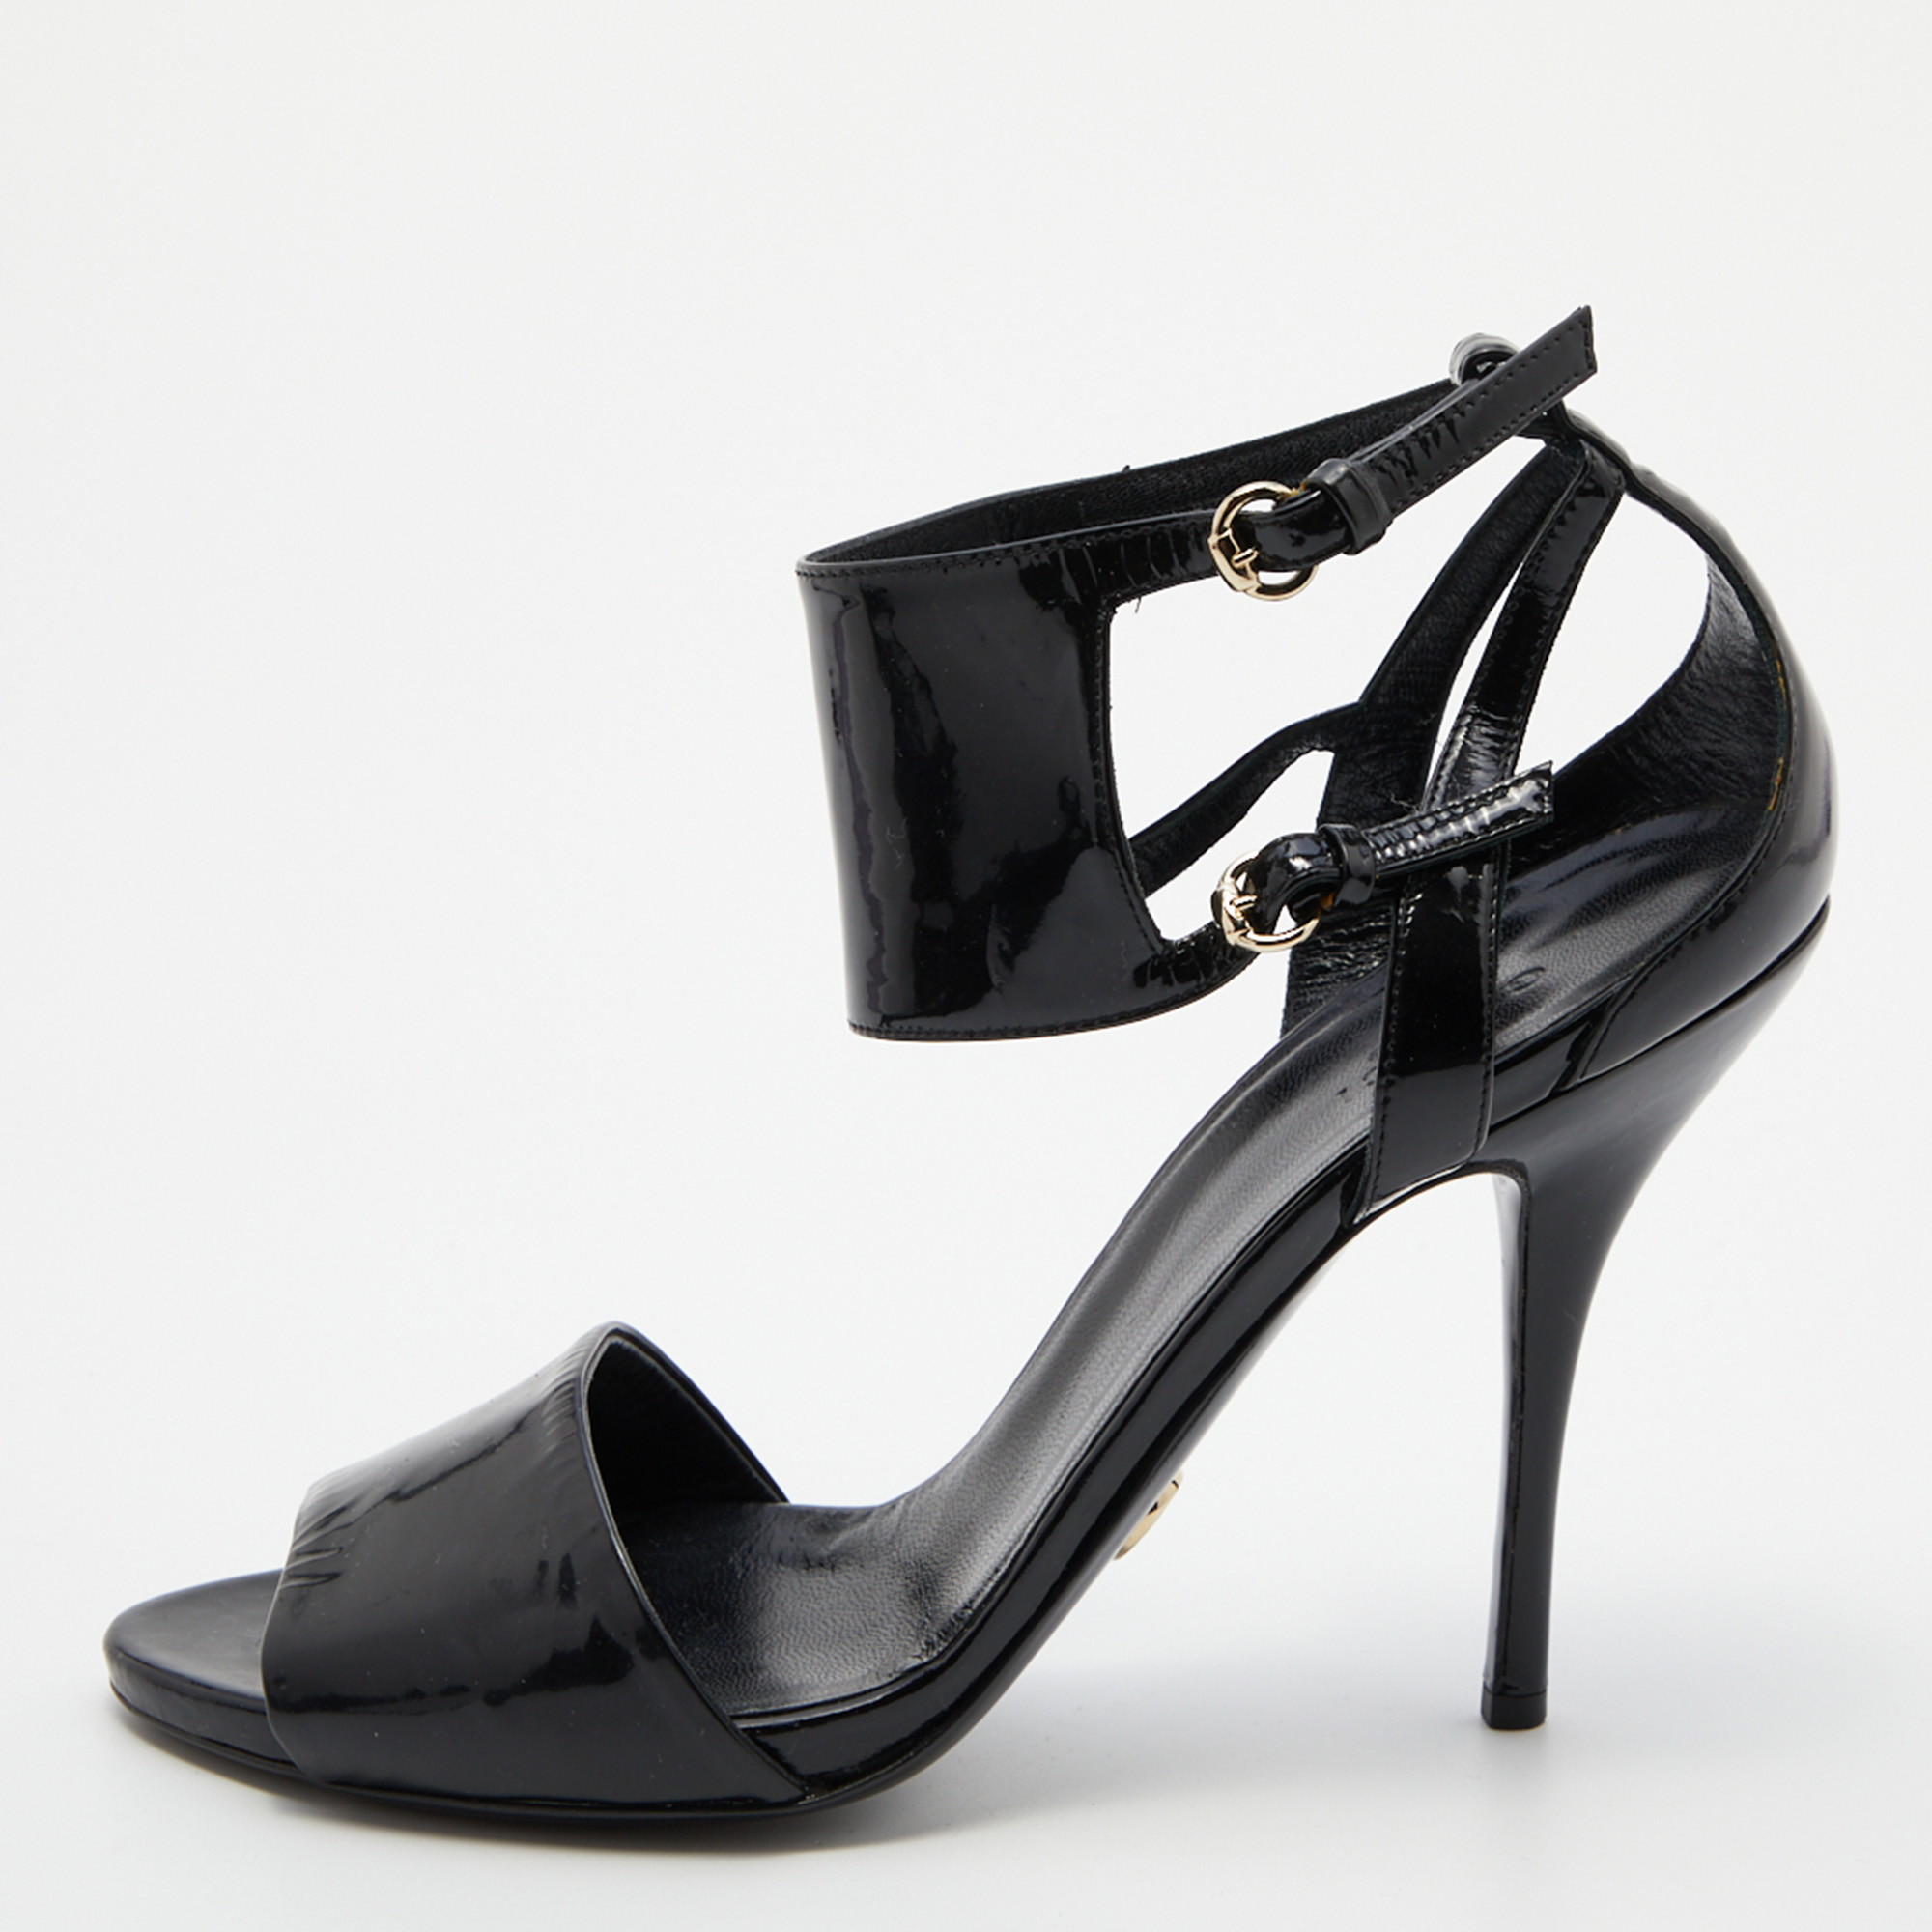 Pre-owned Gucci Black Patent Leather Open Toe Ankle Strap Sandals Size 38.5